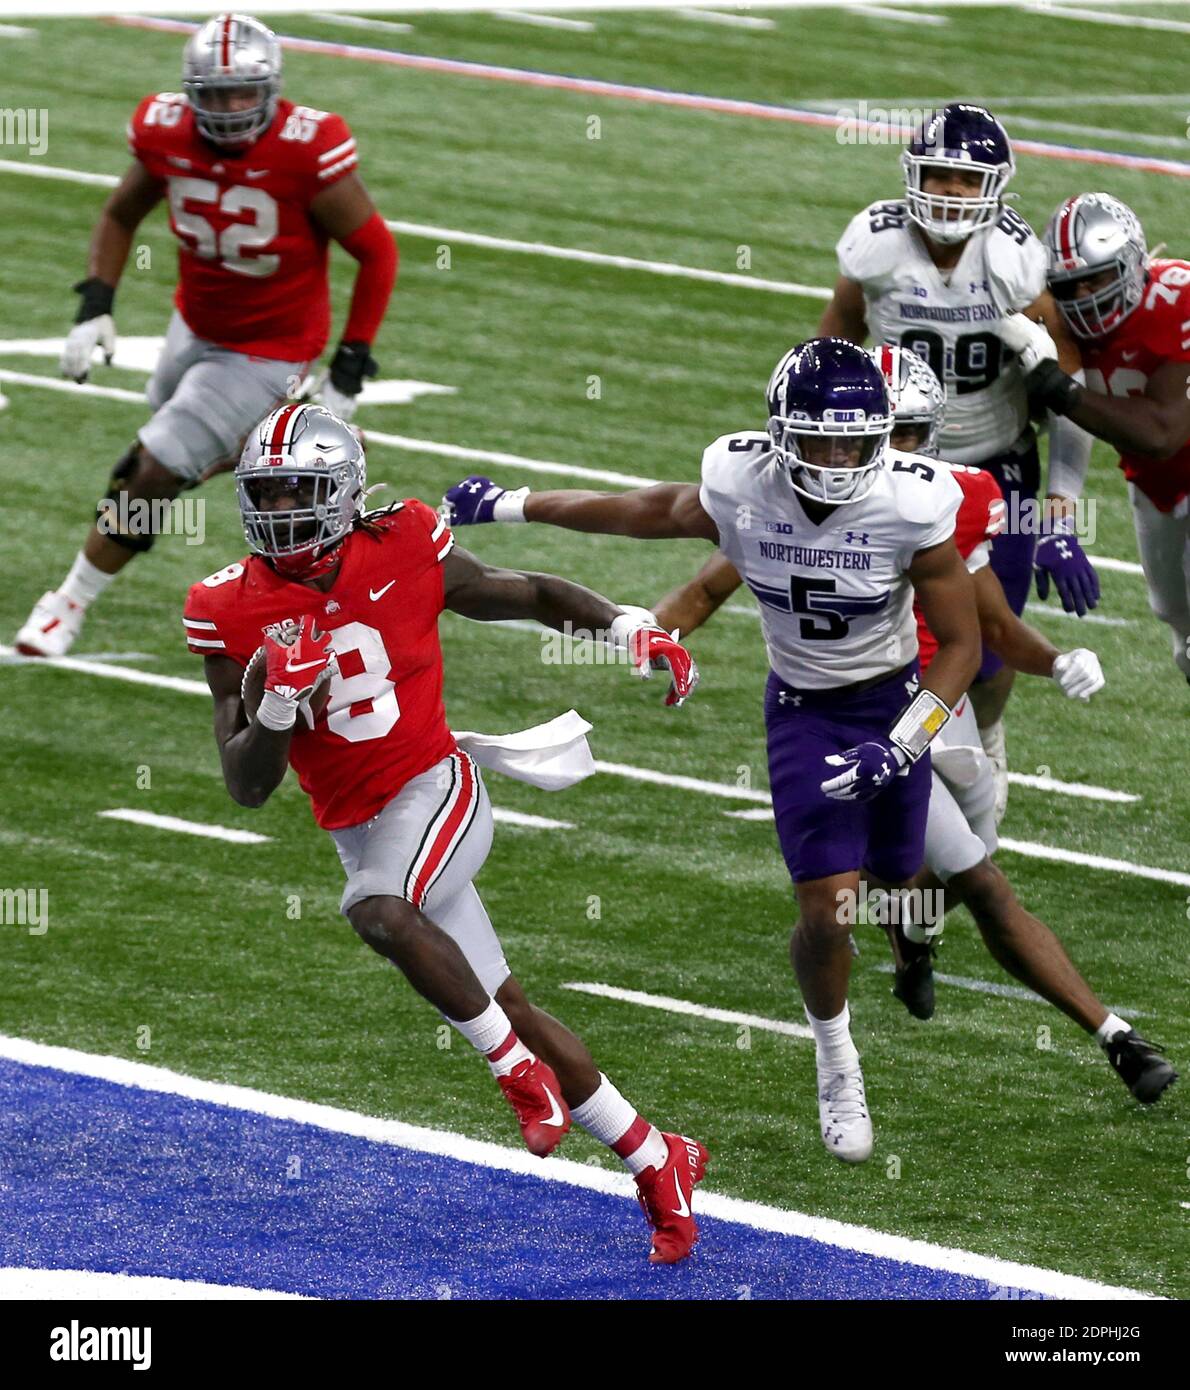 Indianapolis, United States. 19th Dec, 2020. Ohio State Buckeyes running back Trey Sermon (8) runs into the endzone for a second half touchdown against the Northwestern Wildcats in the Big Ten Championship game Saturday, December 19, 2020 in Indianapolis, Indiana. Photo by Aaron Josefczyk/UPI Credit: UPI/Alamy Live News Stock Photo